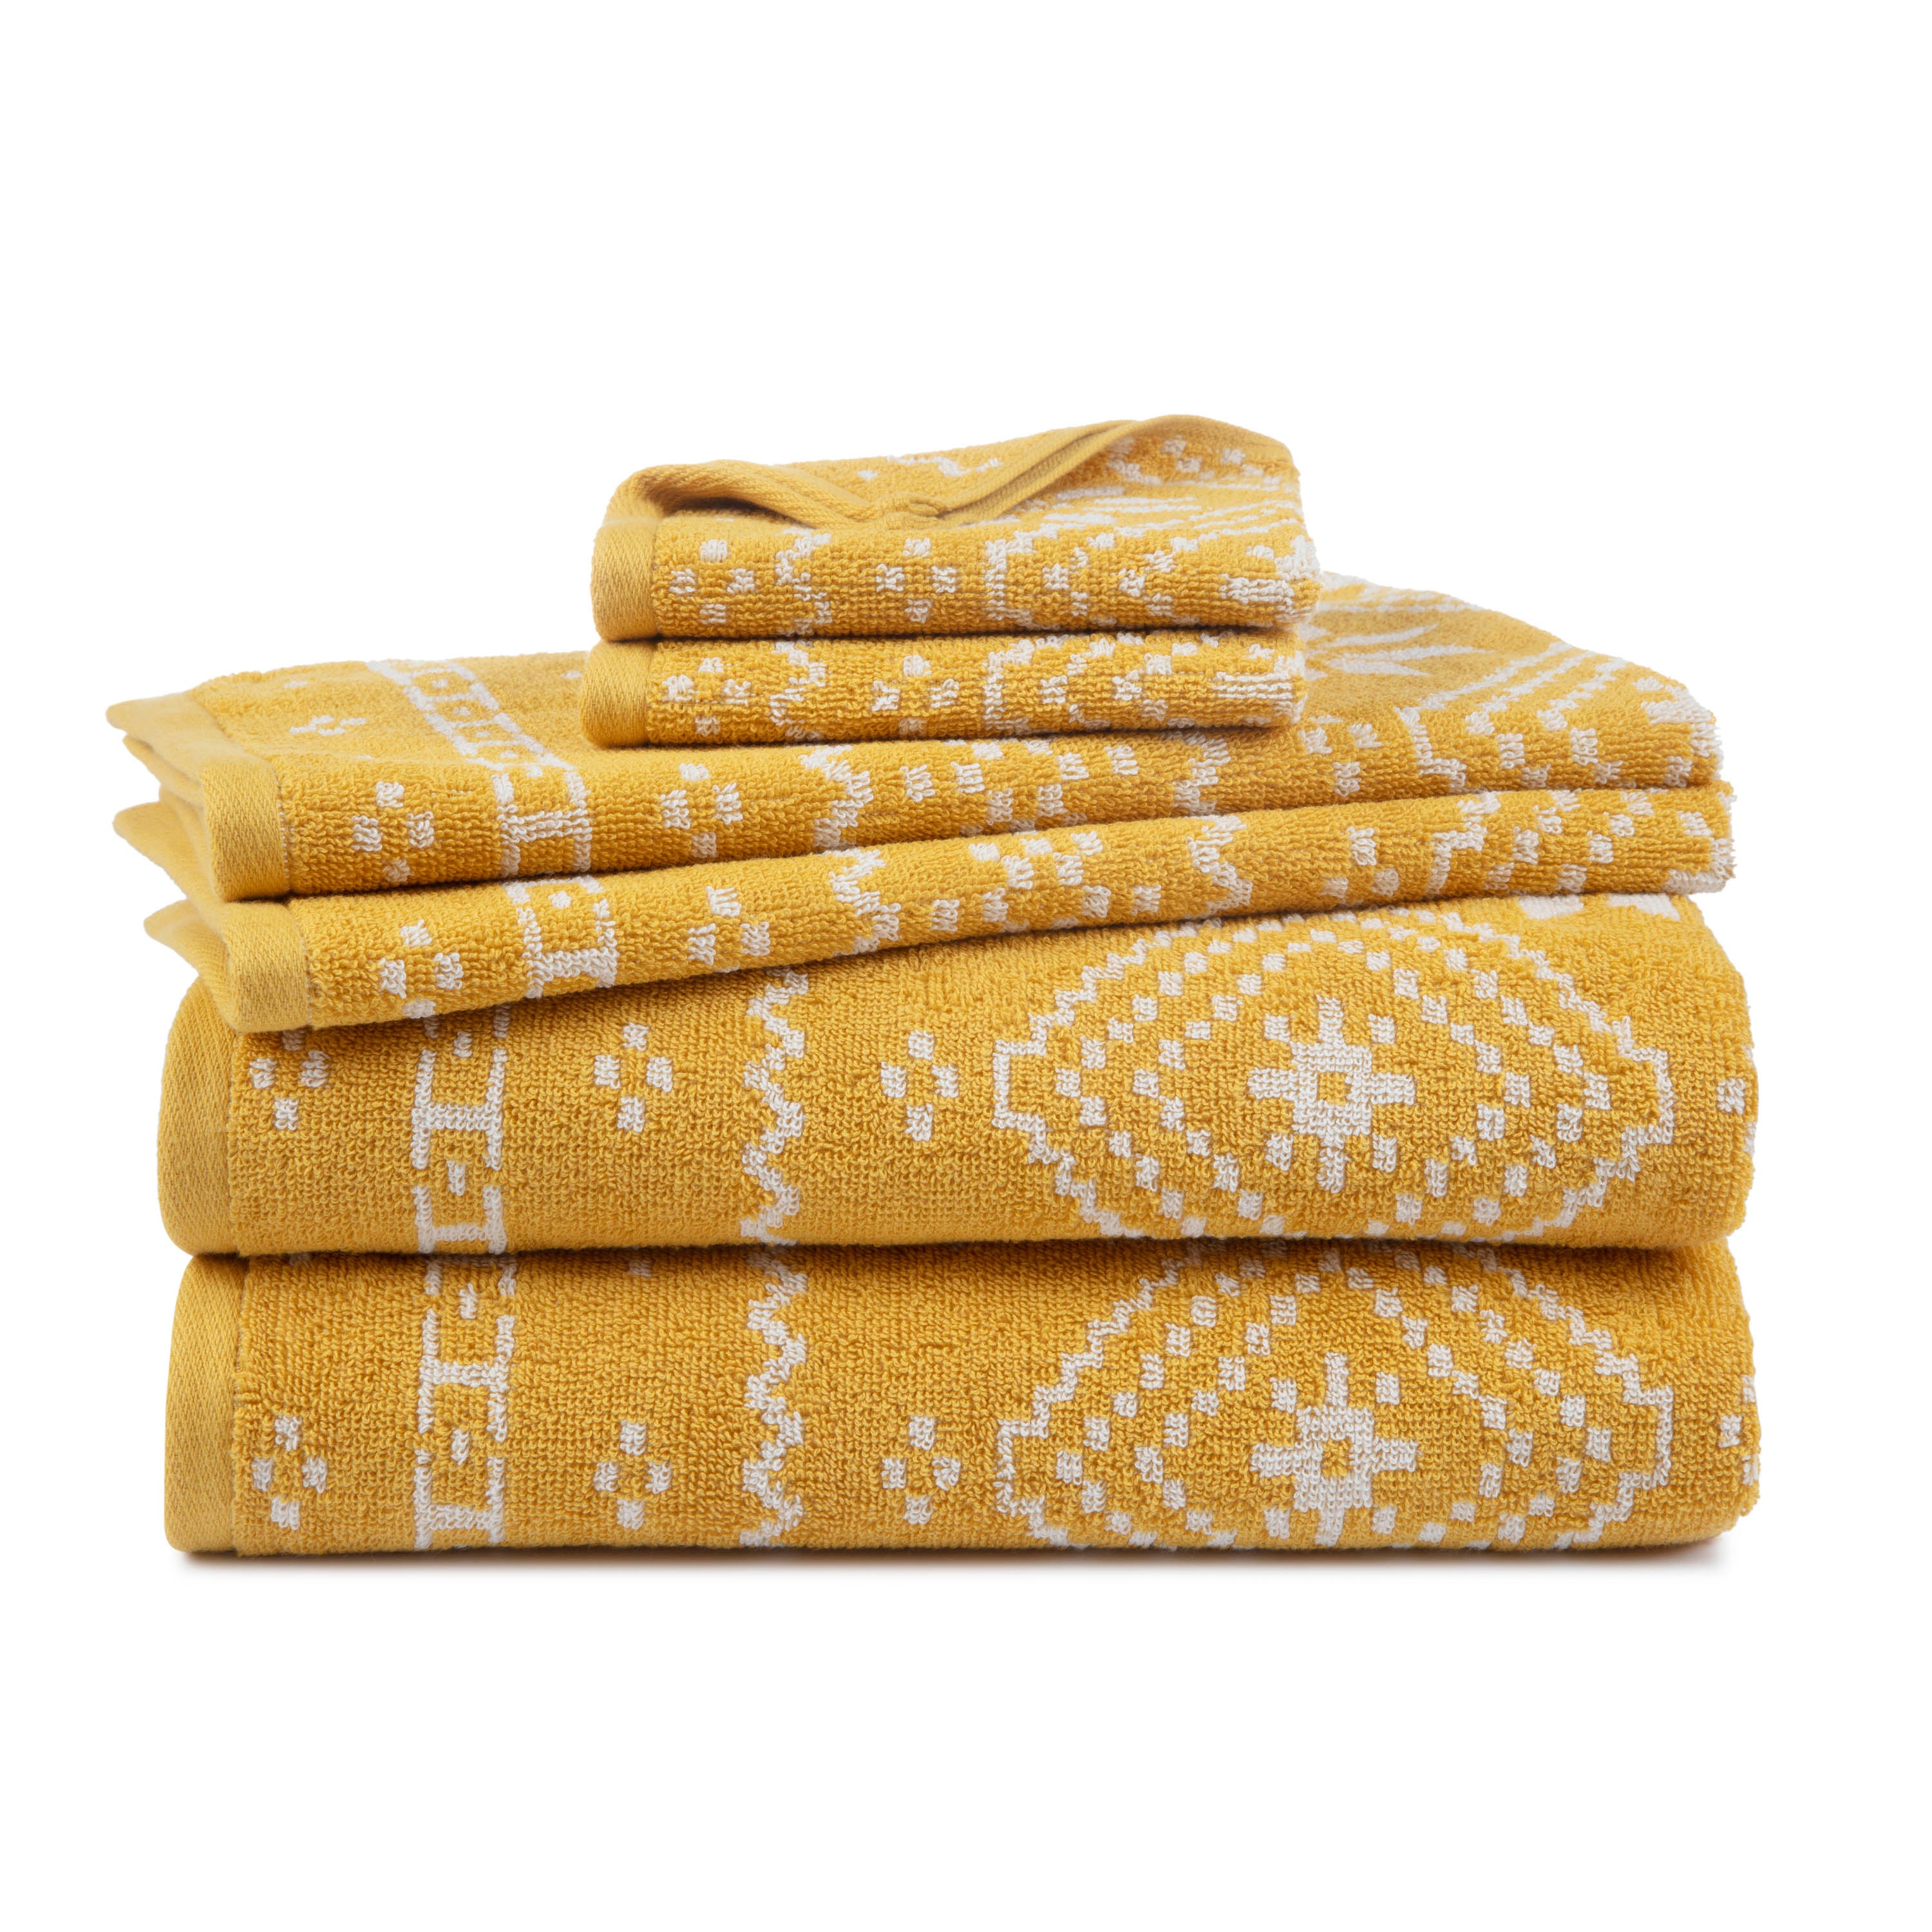 6-Piece Towel Sets Only $29.99 - My Pillow